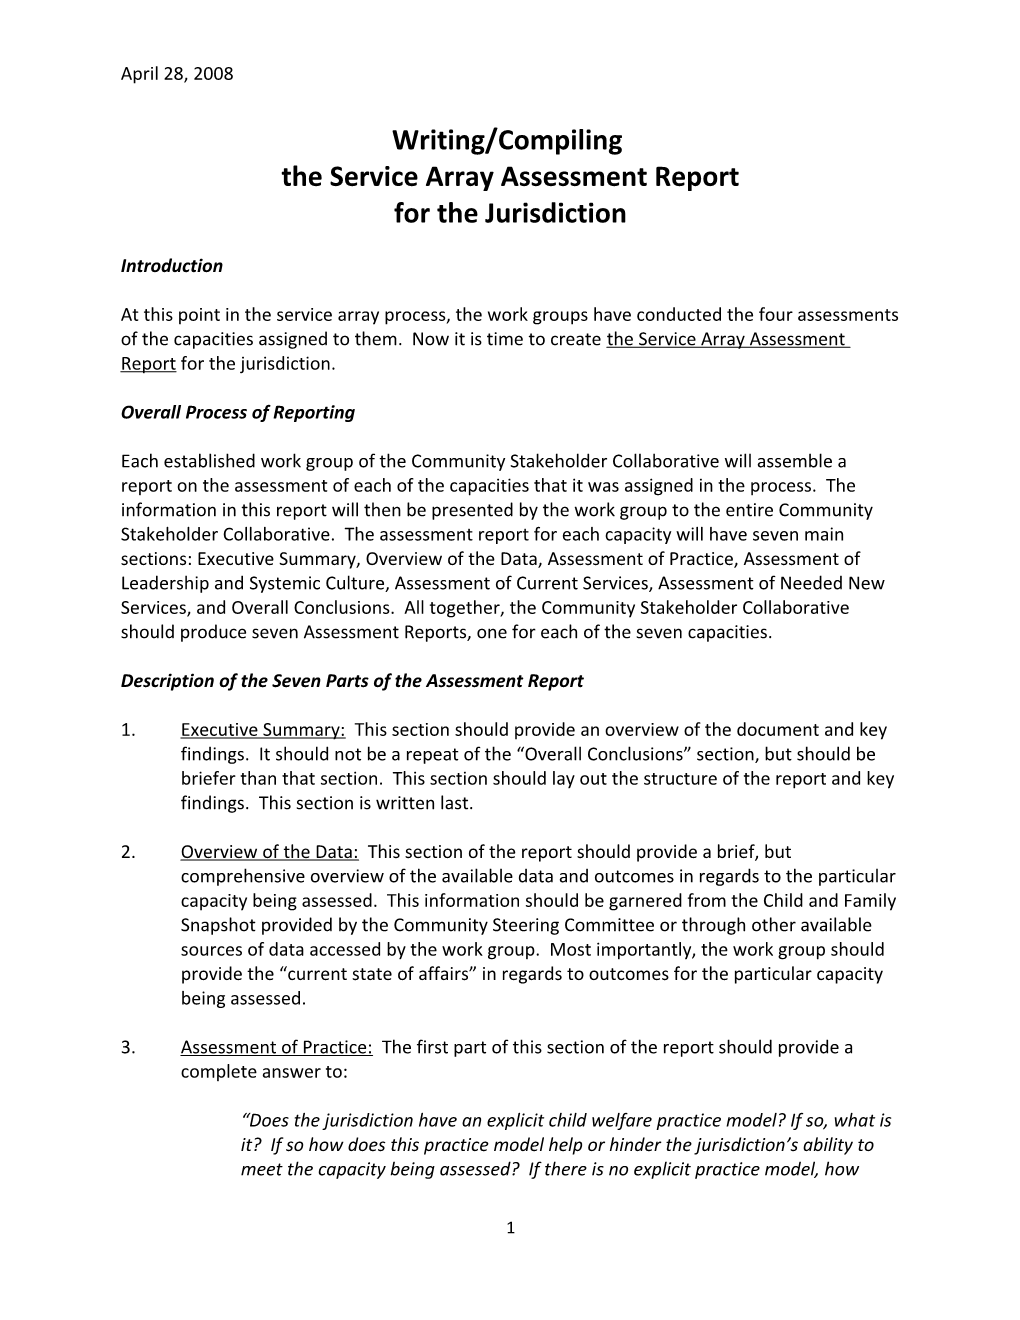 The Service Array Assessment Report